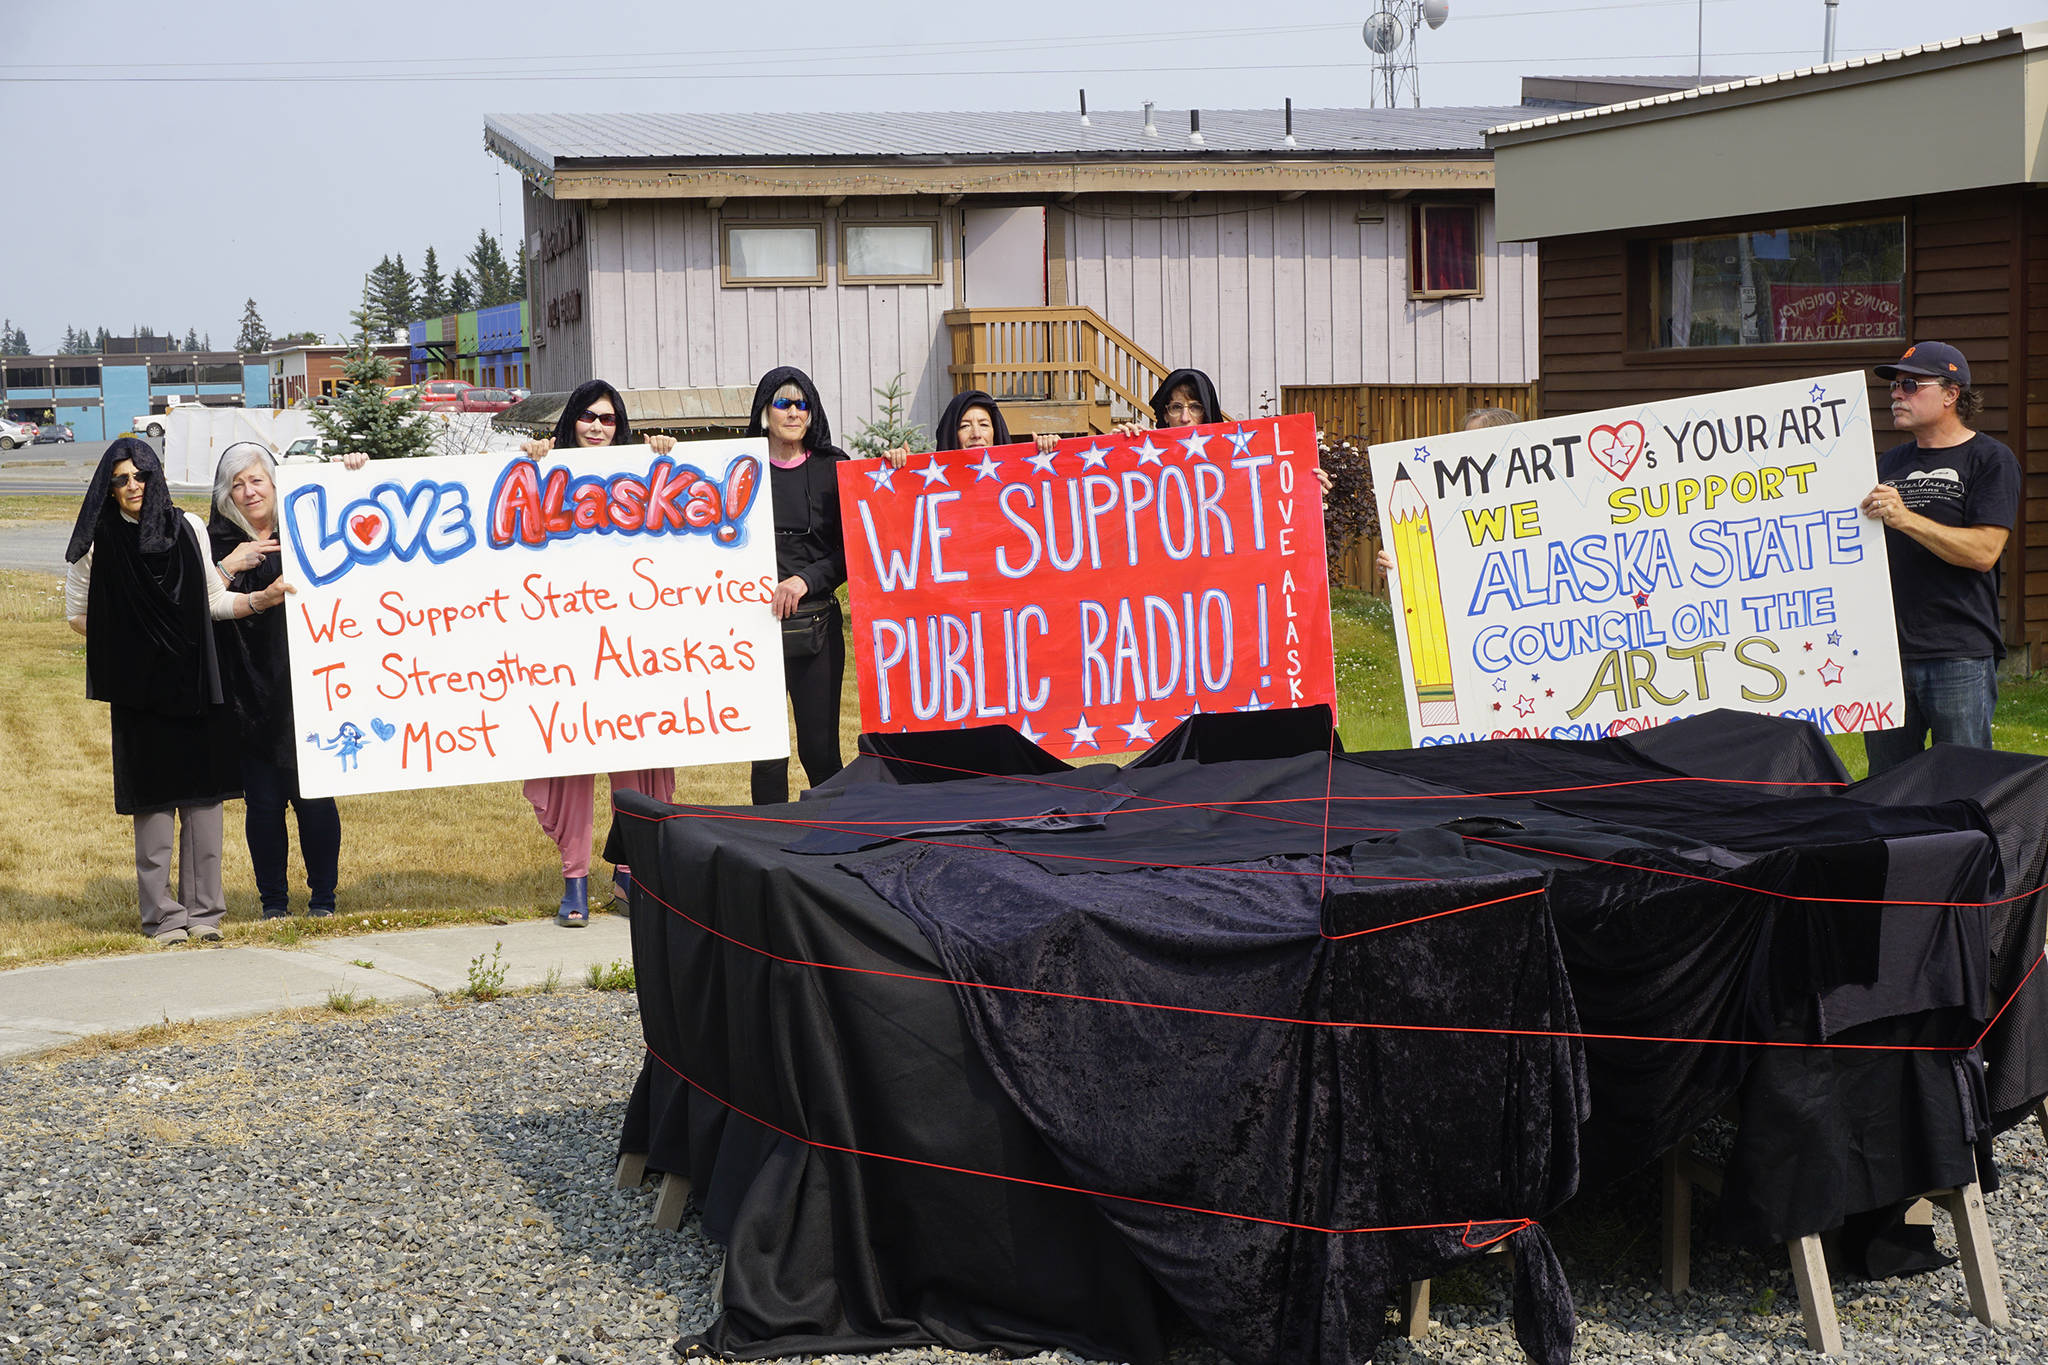 People draped in black hold signs on July 9, 2019, by Sean Derry’s public art sculpture in Homer, Alaska, as part of a statewide art intervention to protest Gov. Mike Dunleavy’s veto of a $2.8 million state appropriation to the Alaska State Council on the Arts. They also supported a general override of Dunleavy’s vetoes that will affect funding for the University of Alaska, public radio and other programs. Derry’s sculpture was commissioned as a 1% for art project associated with the remodeling of Pioneer Hall at the Kachemak Bay Campus, Kenai Peninsula College, University of Alaska. The protest was not sanctioned by the college. (Photo by Michael Armstrong/Homer News)